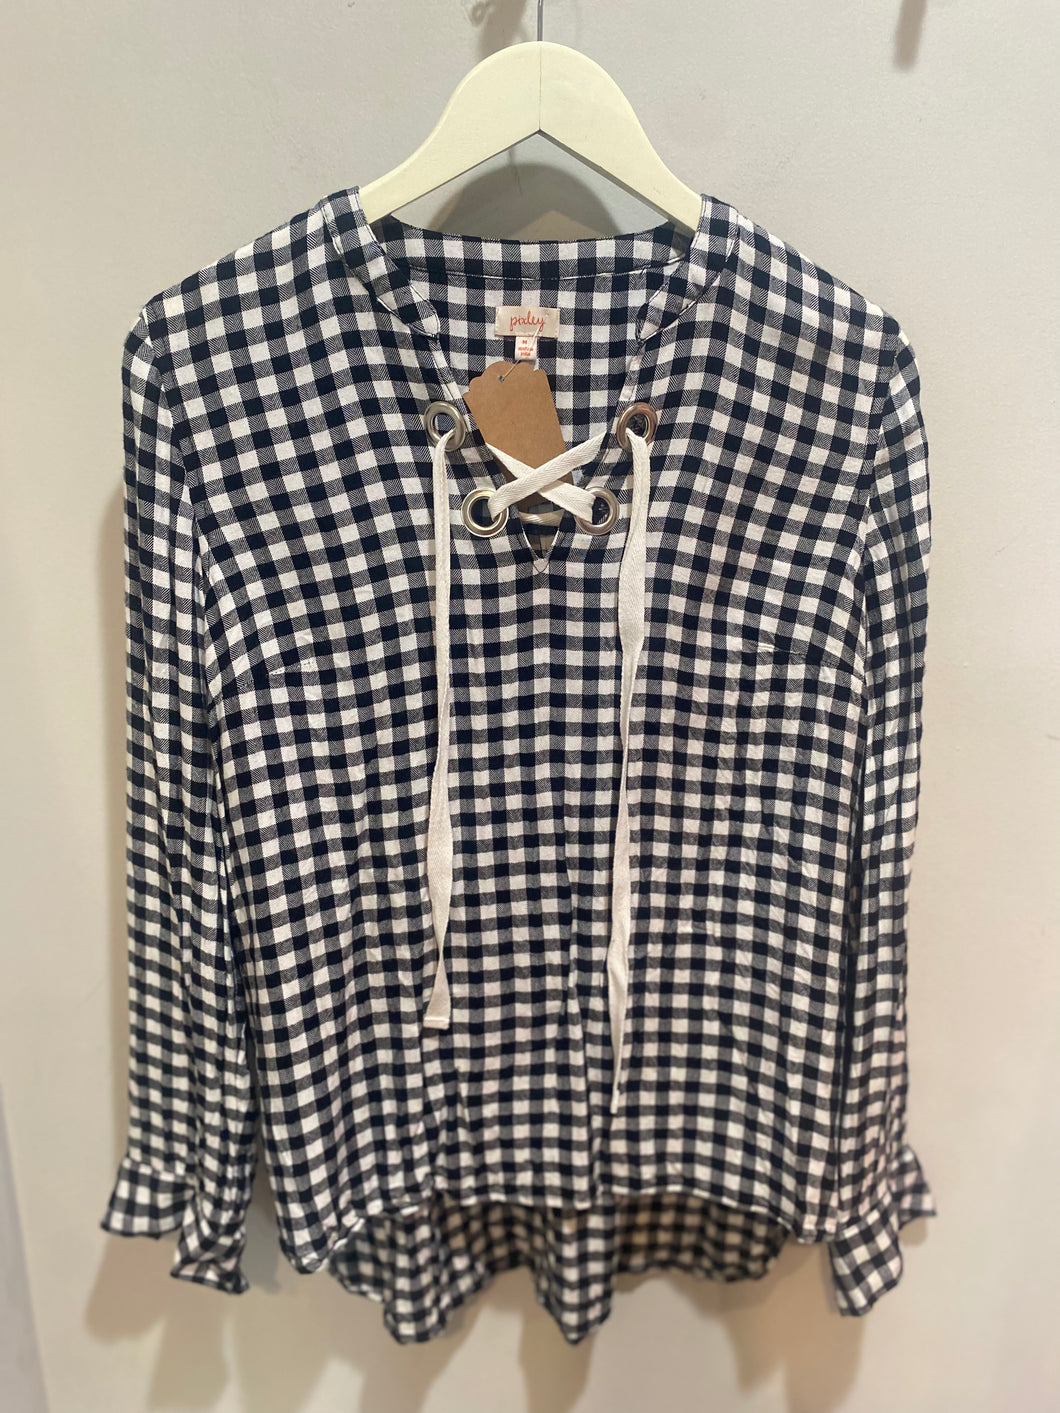 Anthropologie Pixley Black White Gingham Laceup Top